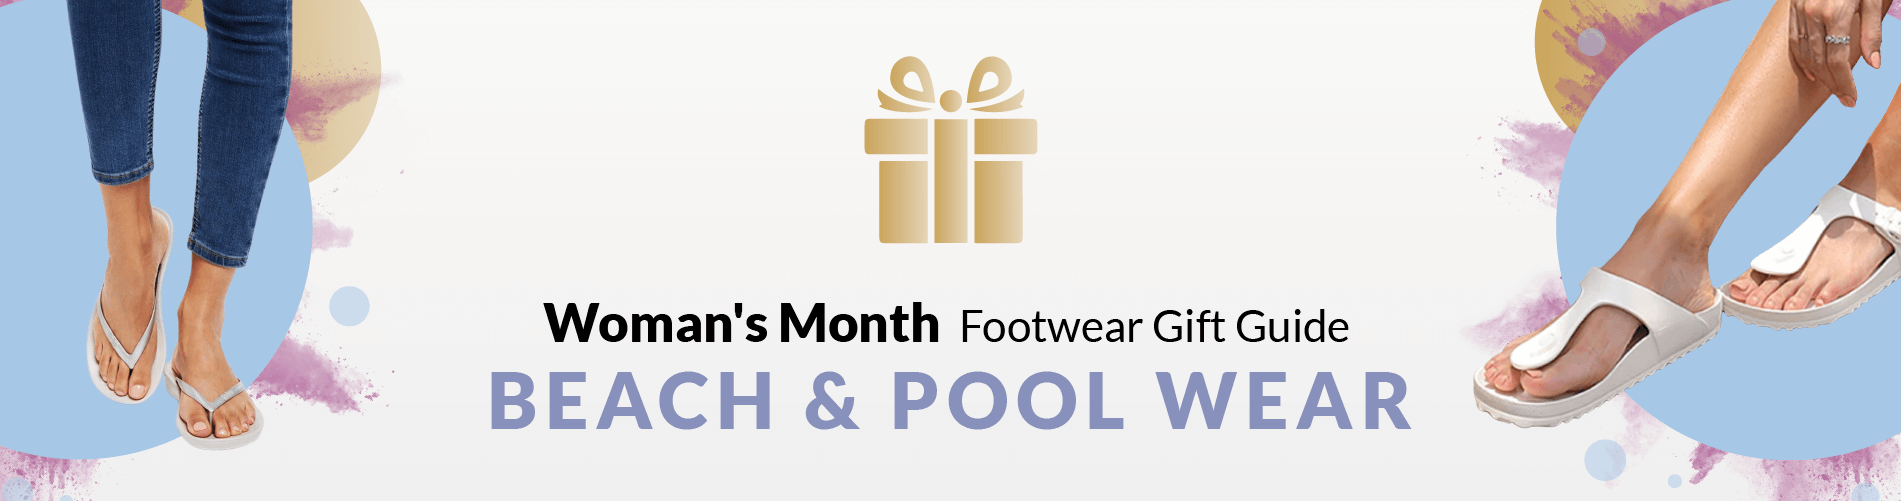 Womens Month Footware Gift Guide